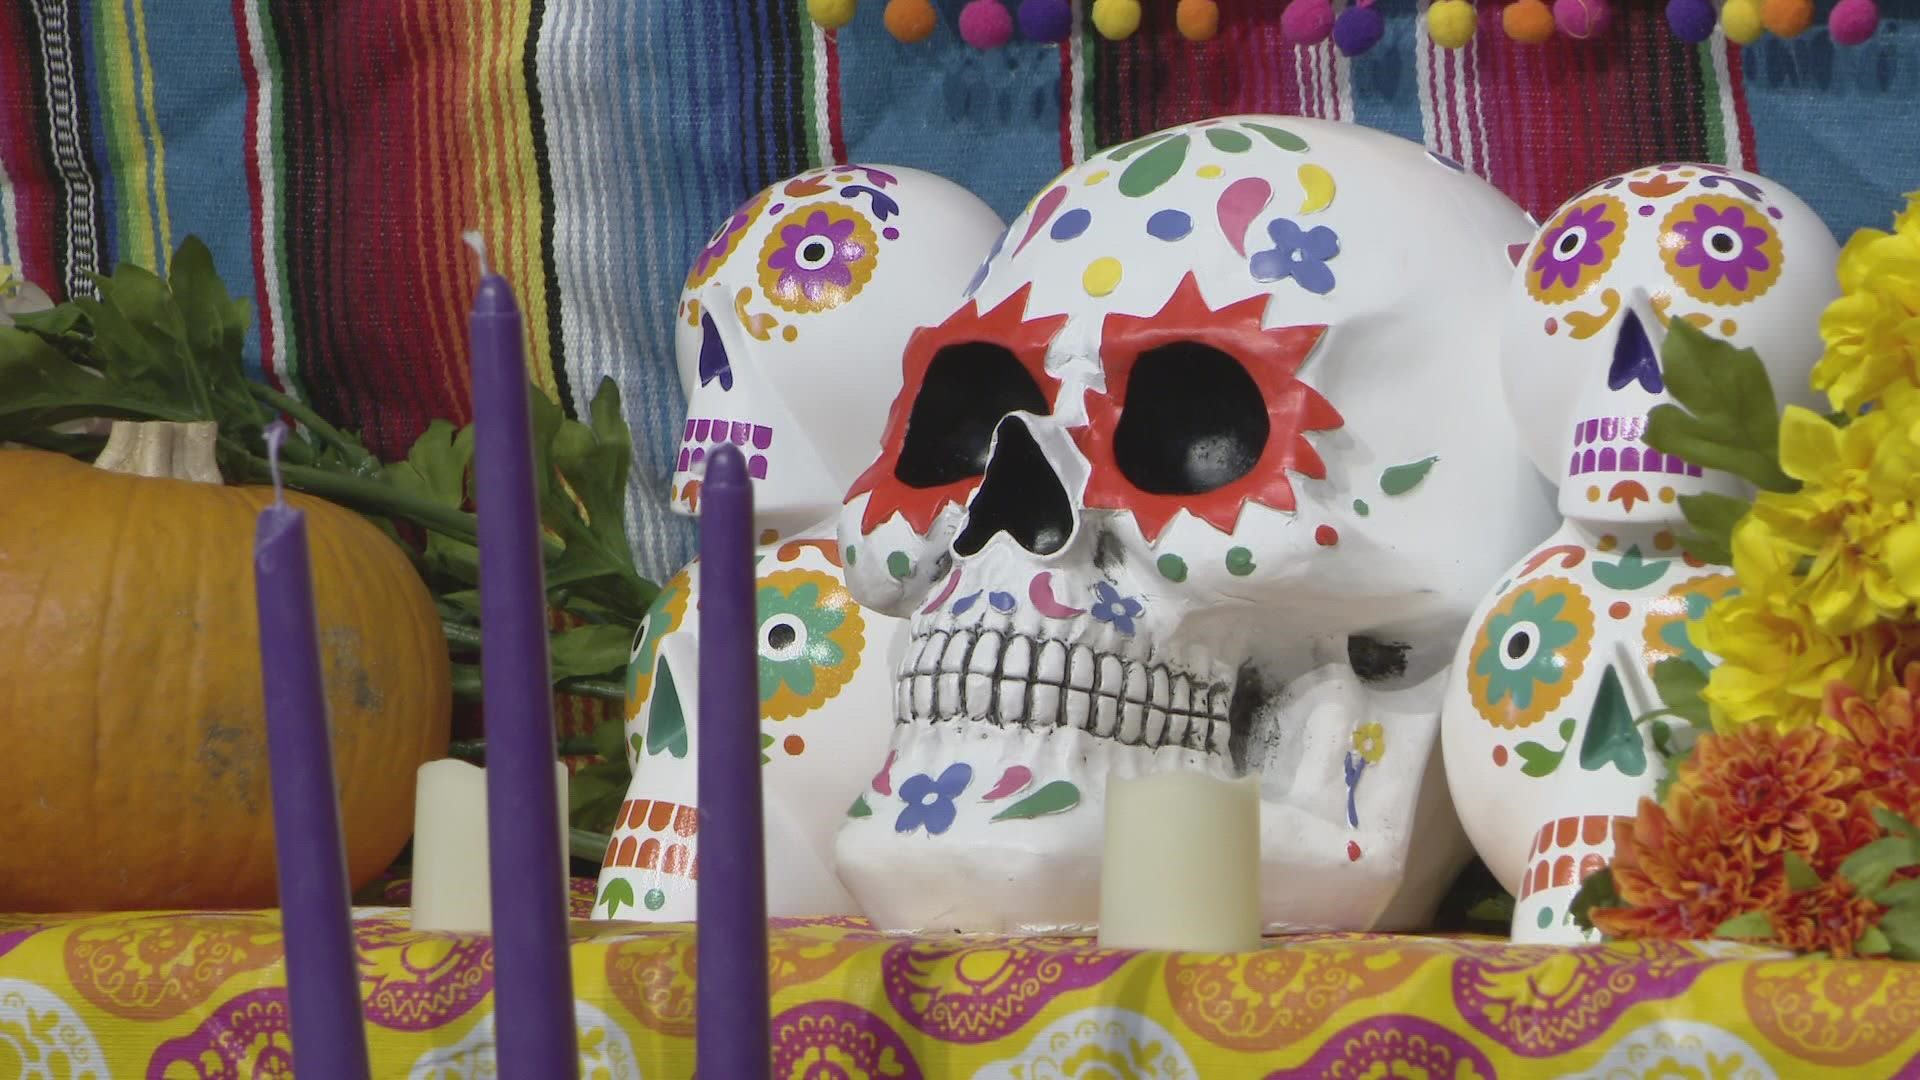 While the Day of the Dead includes costumes, skulls and parades - it is not a Mexican version of Halloween. KING 5's Farah Jadran explains the annual tradition.